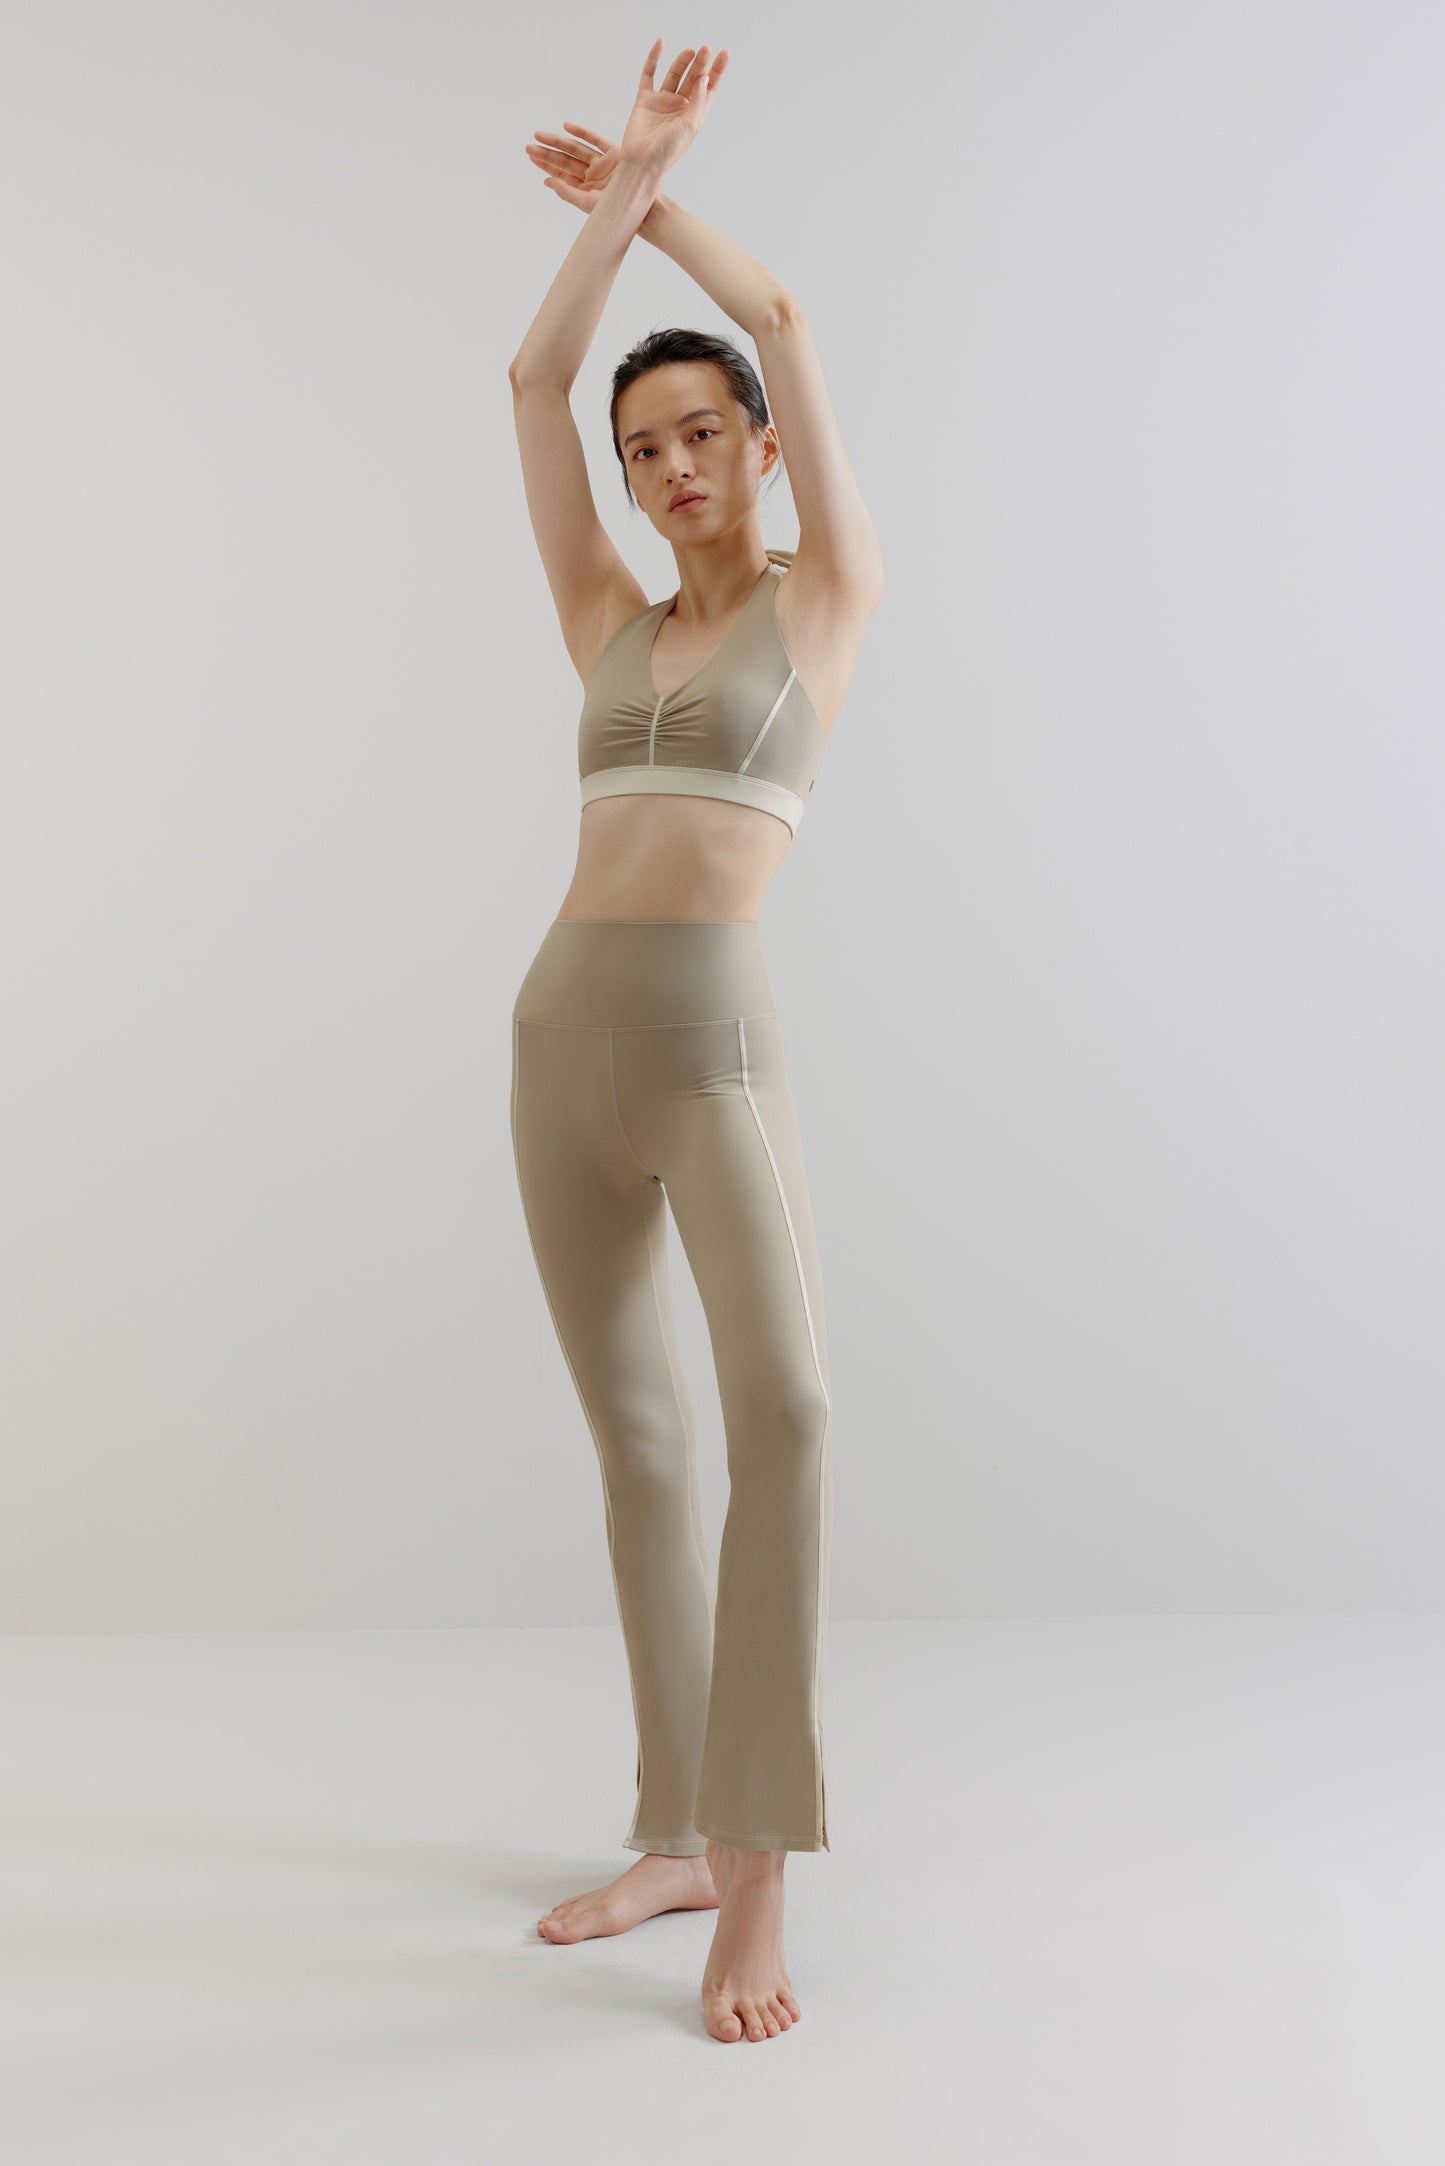 A woman wears a grey sports bra and flare leggings